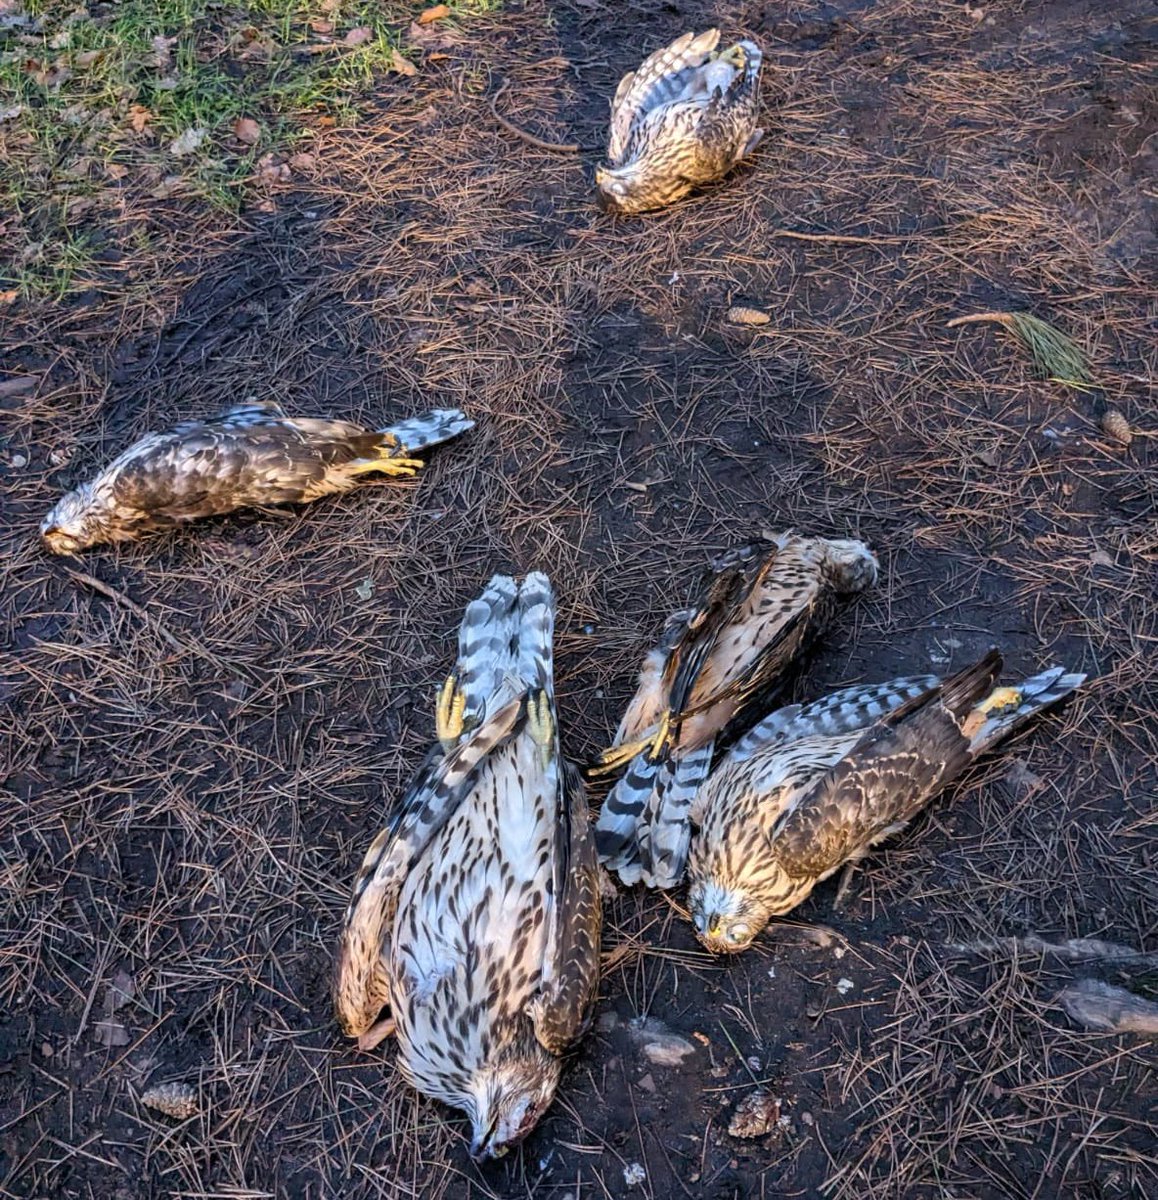 FIVE goshawks shot & dumped in King's Forest, Suffolk: police appeal for information. These birds were found on Monday (16 Jan 2023). If you have any info pls contact @RuralPolicingSC Details in blog ⬇️ raptorpersecutionuk.org/2023/01/18/fiv… #Winterwatch #Suffolk